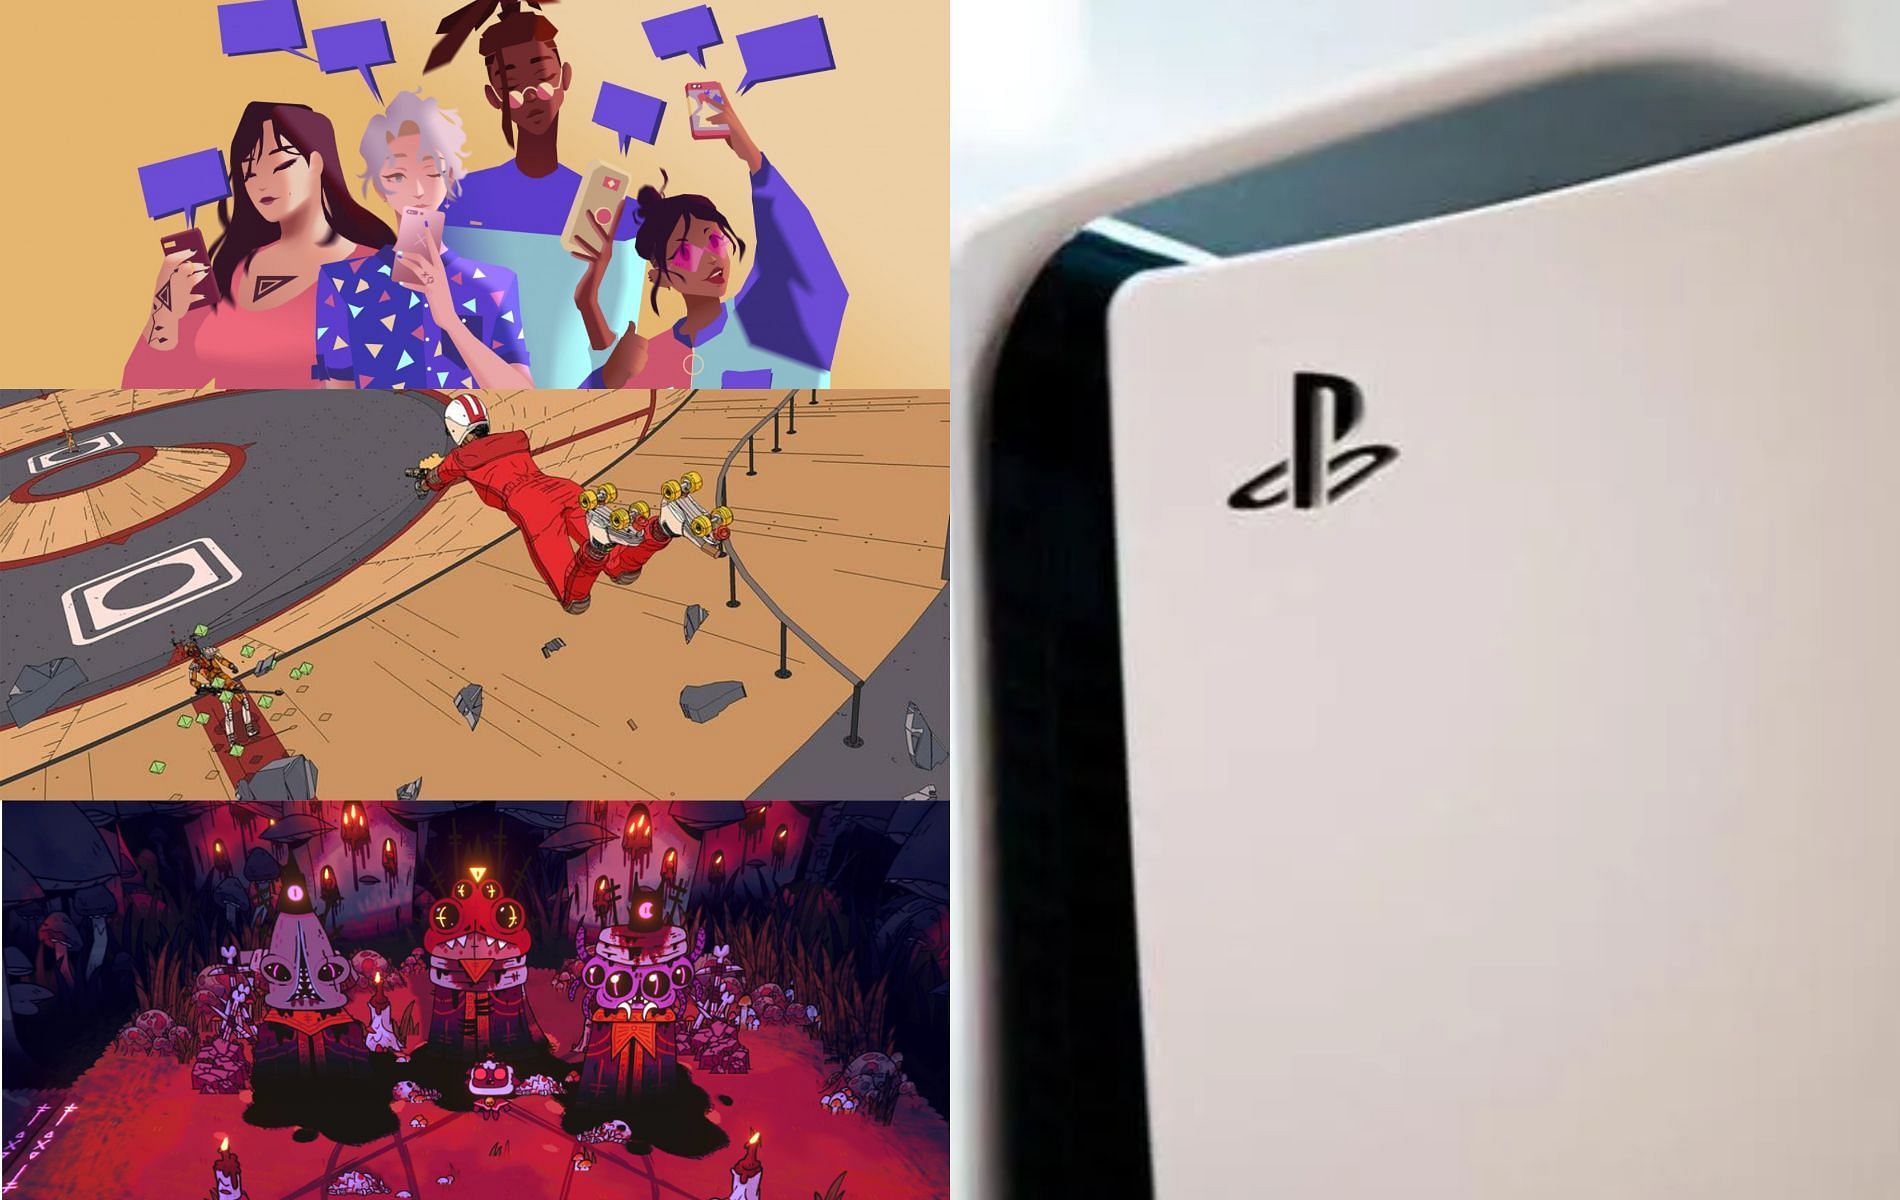 PS4 and PS5 games releasing in August 2022 (Image by Sportskeeda)